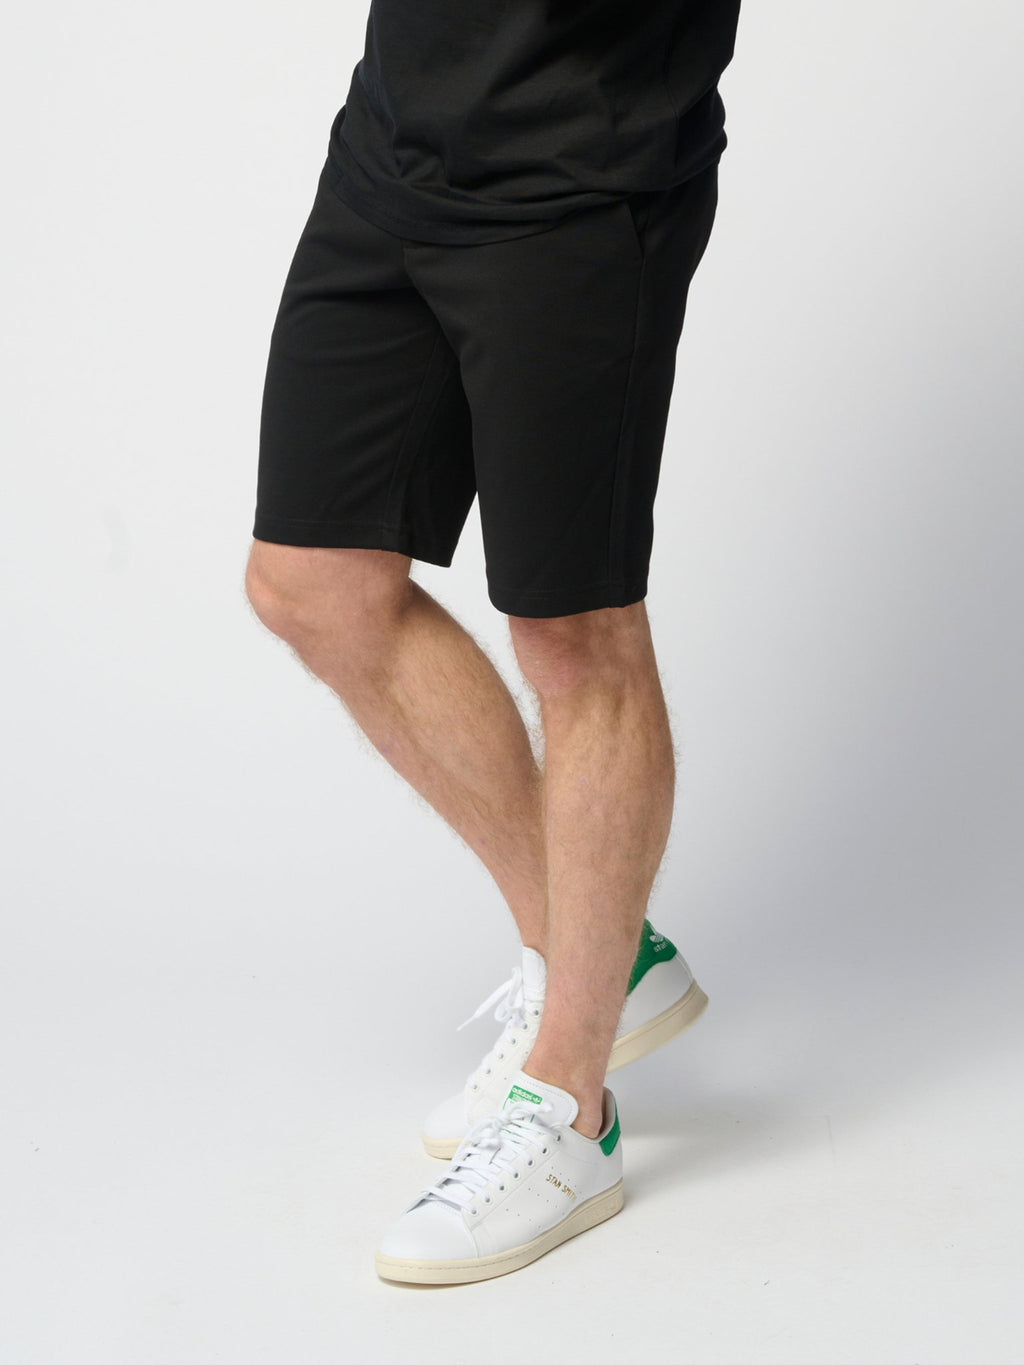 Performance Shorts – Package Deal (4 pcs.)